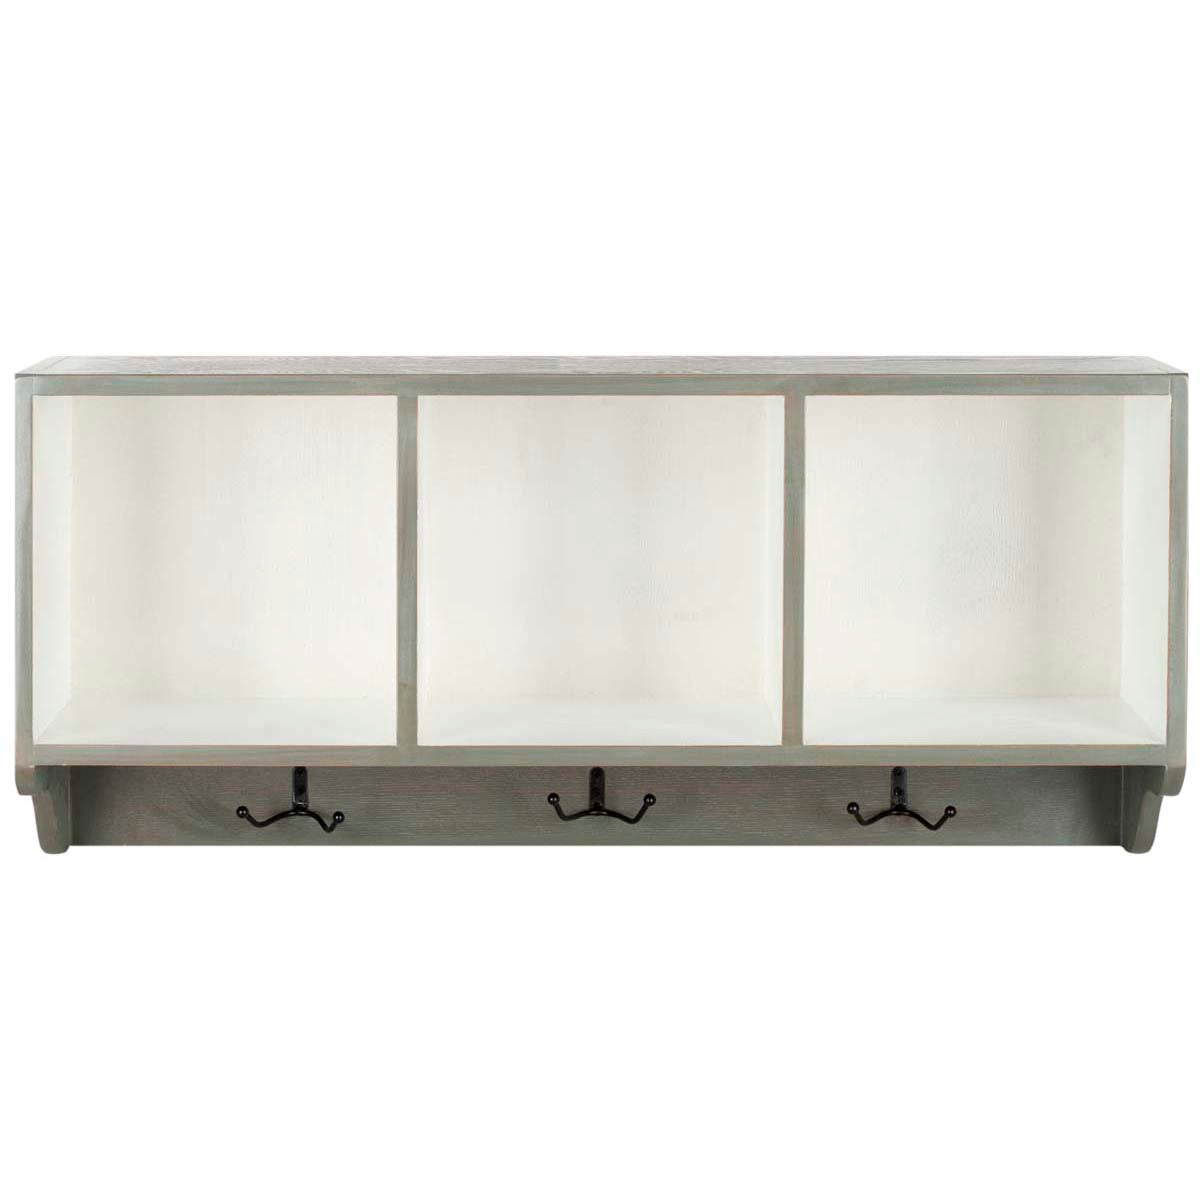 Safavieh Alice Wall Shelf With Storage Compartments , AMH6566 - Ash Grey/White